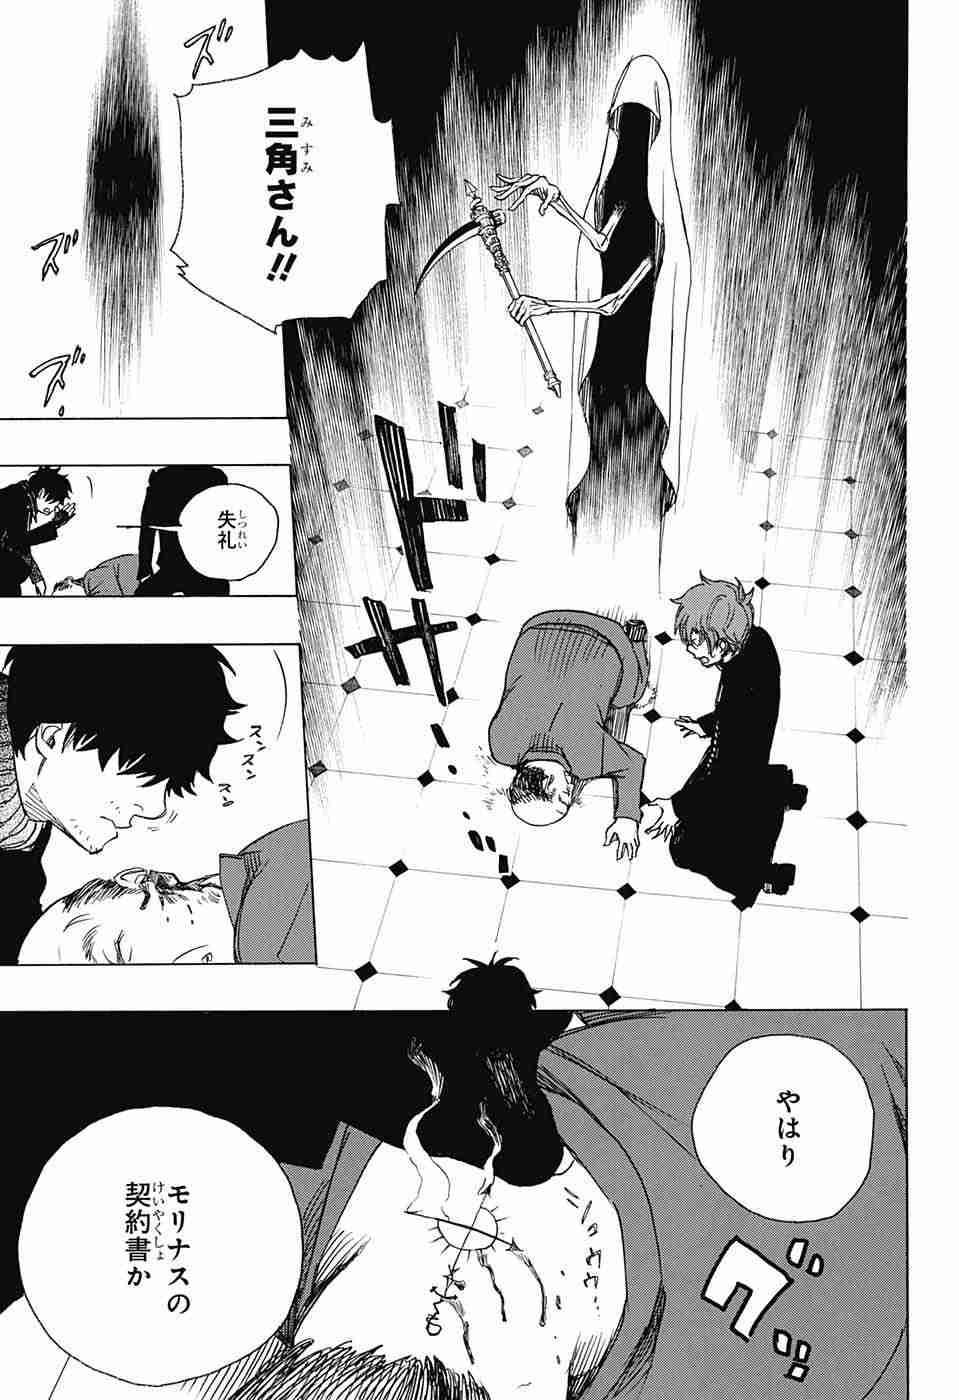 Ao no Exorcist - Chapter 83 - Page 33